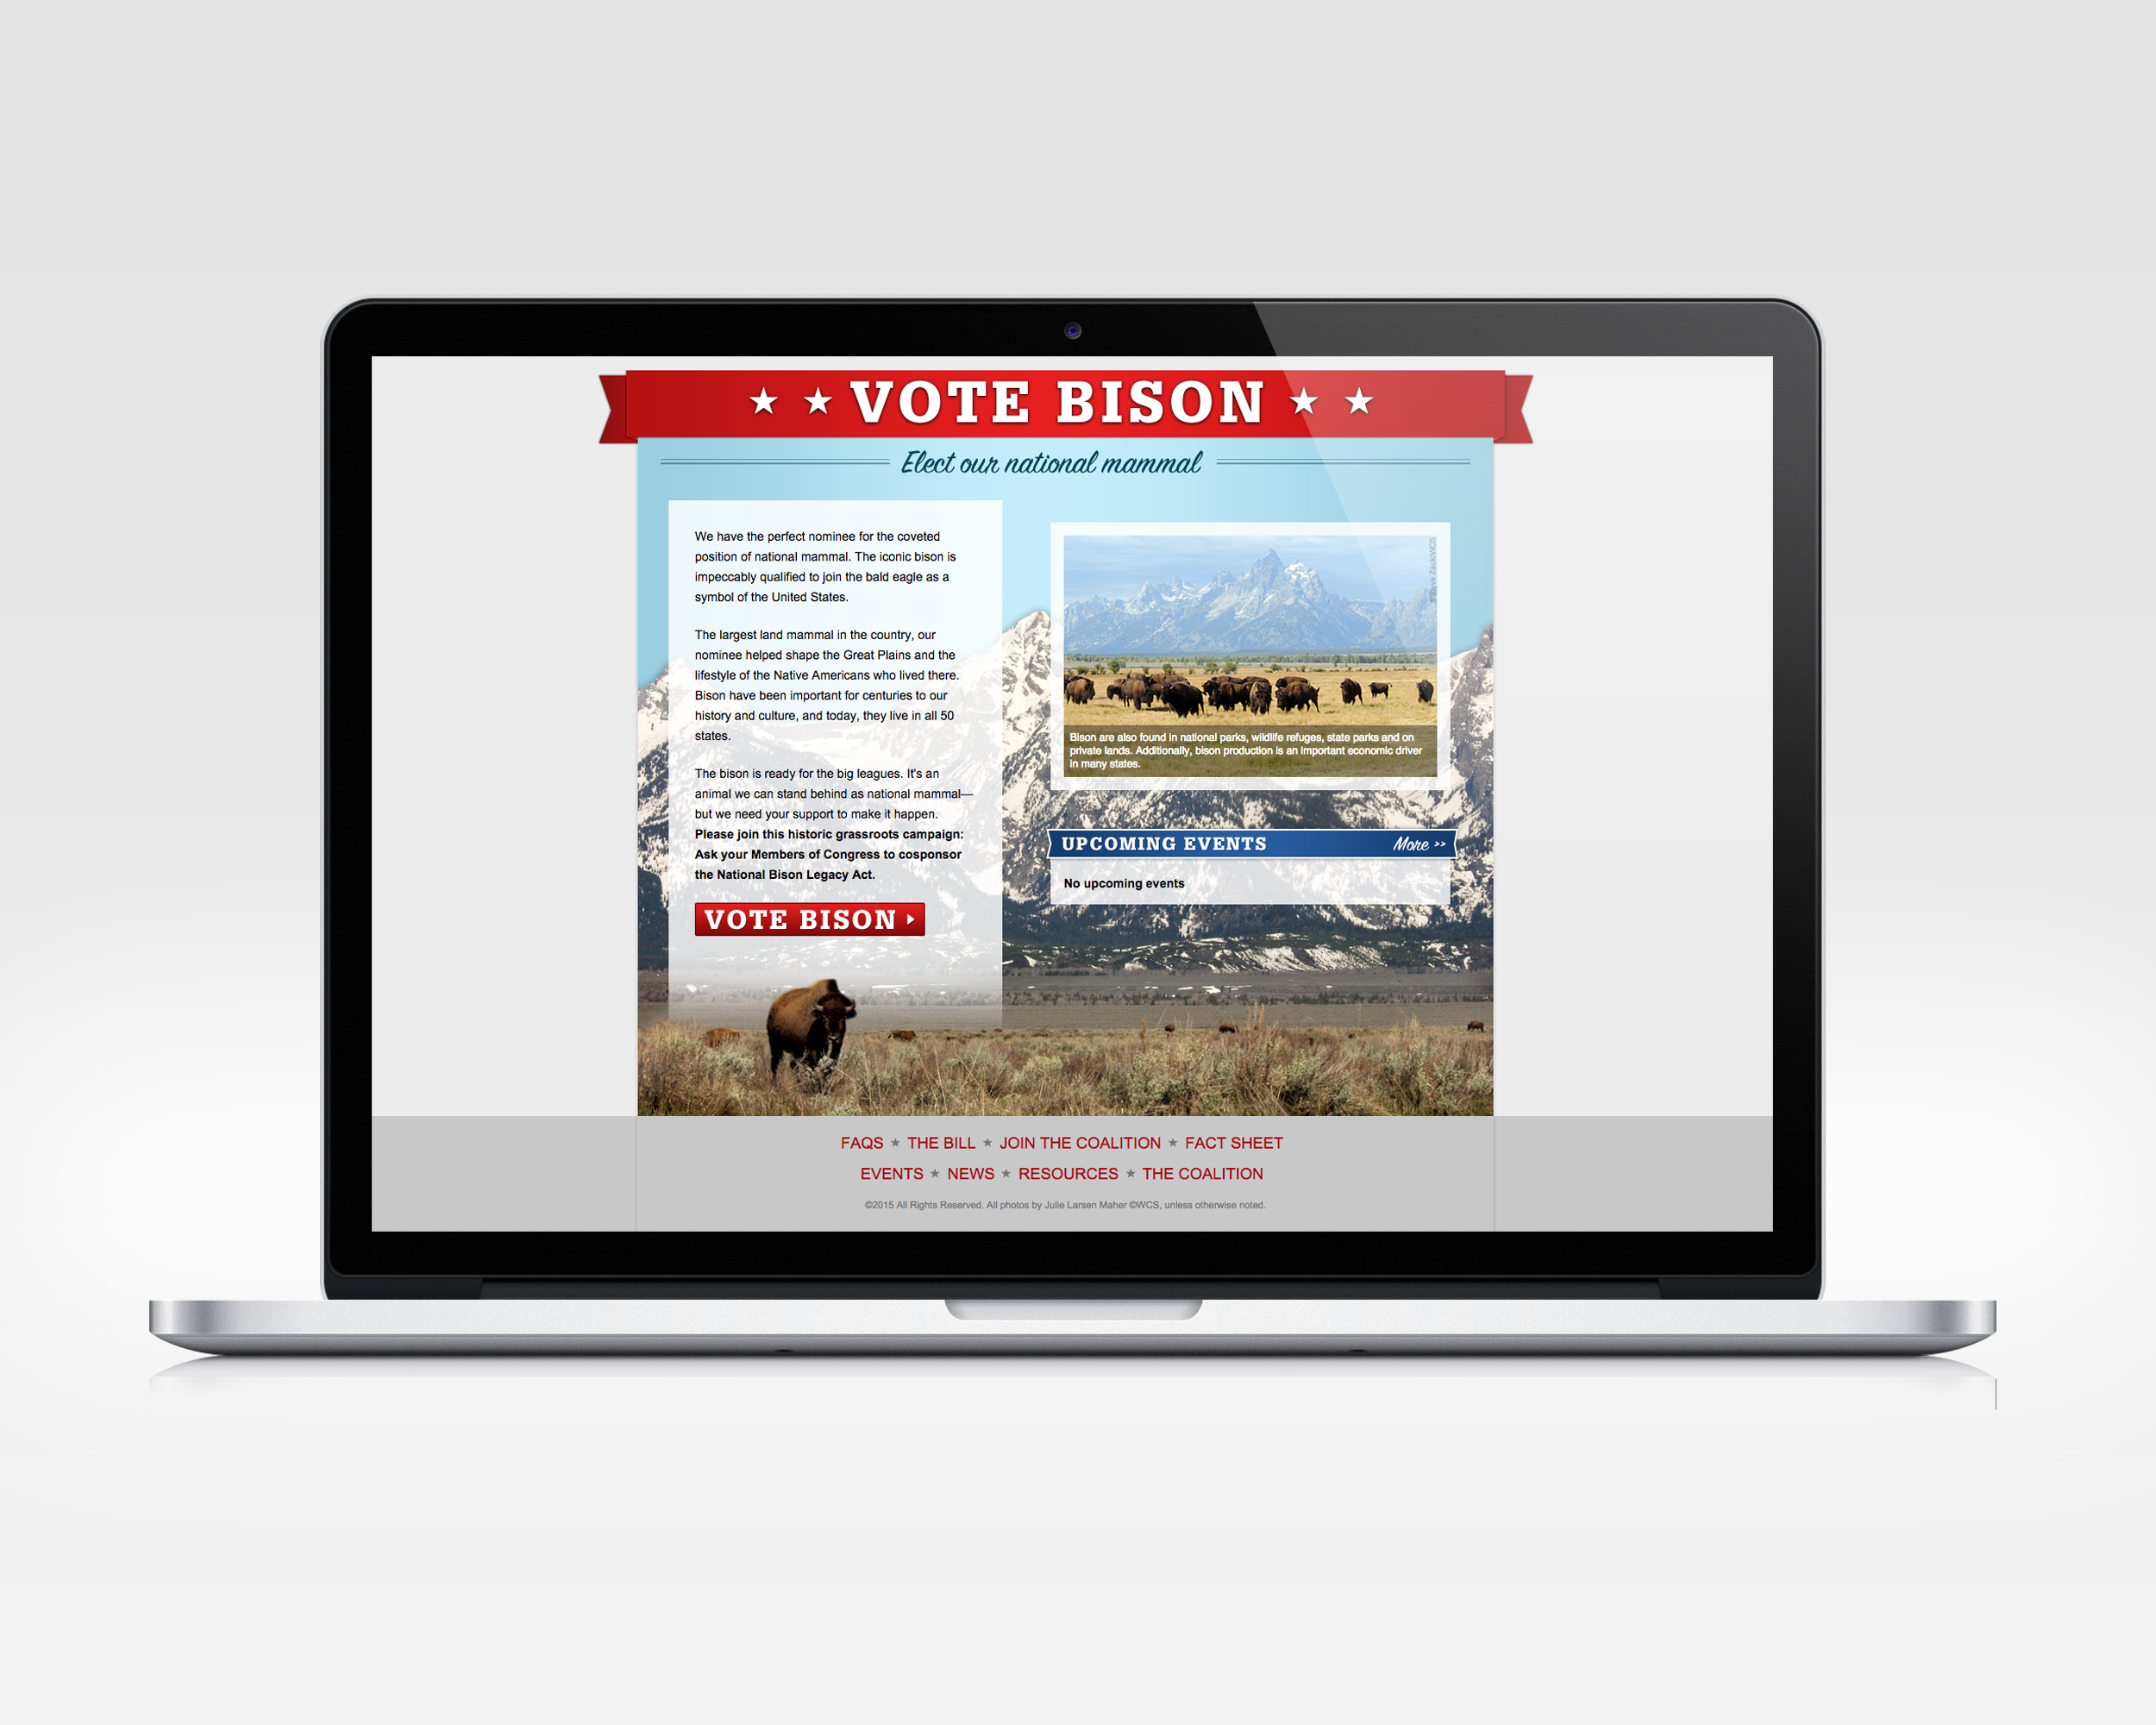   vote bison   design, ux, development   Microsite to support effort&nbsp;to create a&nbsp;federal designation of bison as the national mammal.   View Project     